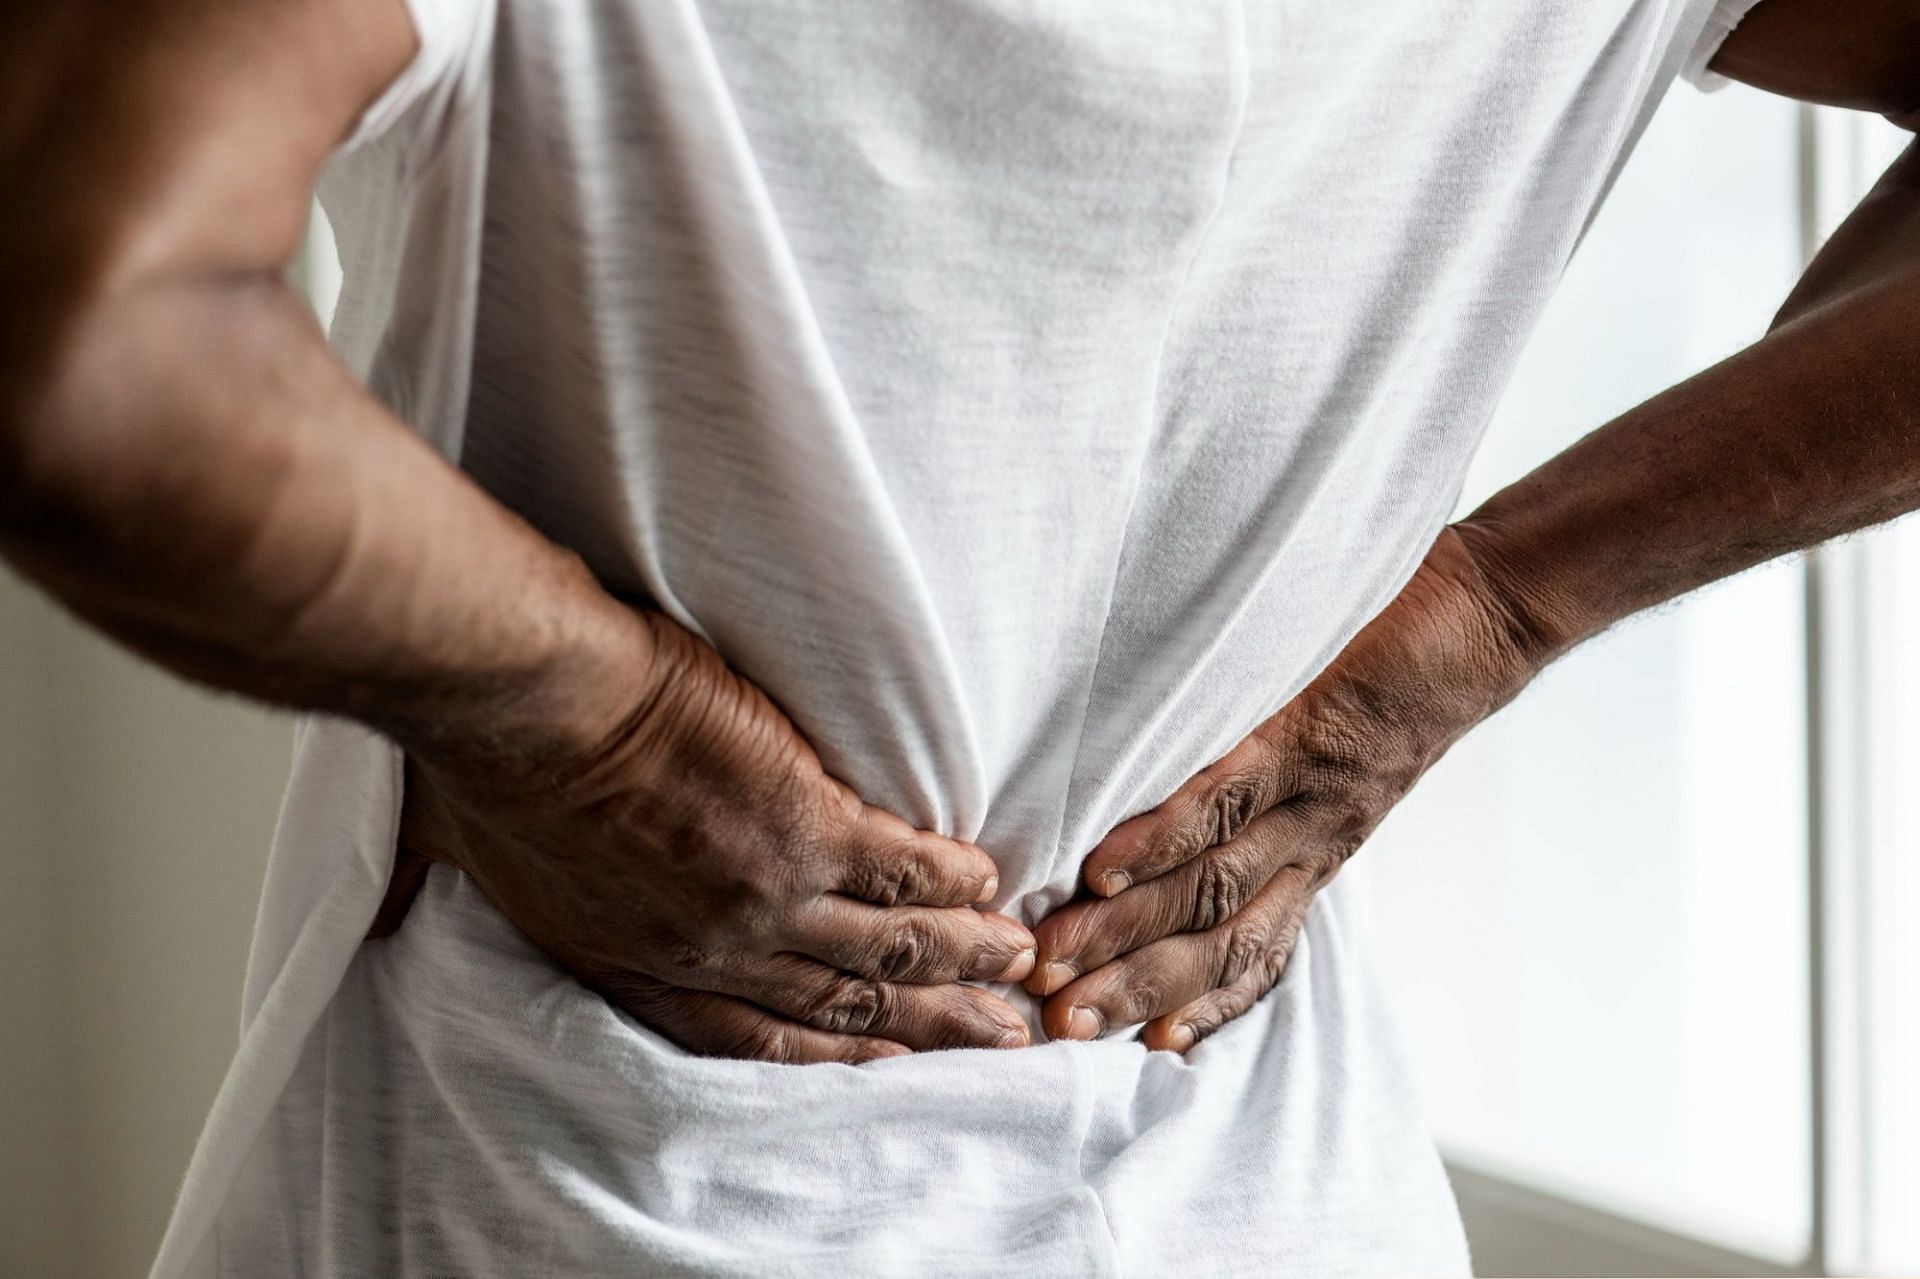 What does kidney pain feel like, if the pain is caused by kidney stones? (Image by rawpixel.com on Freepik)